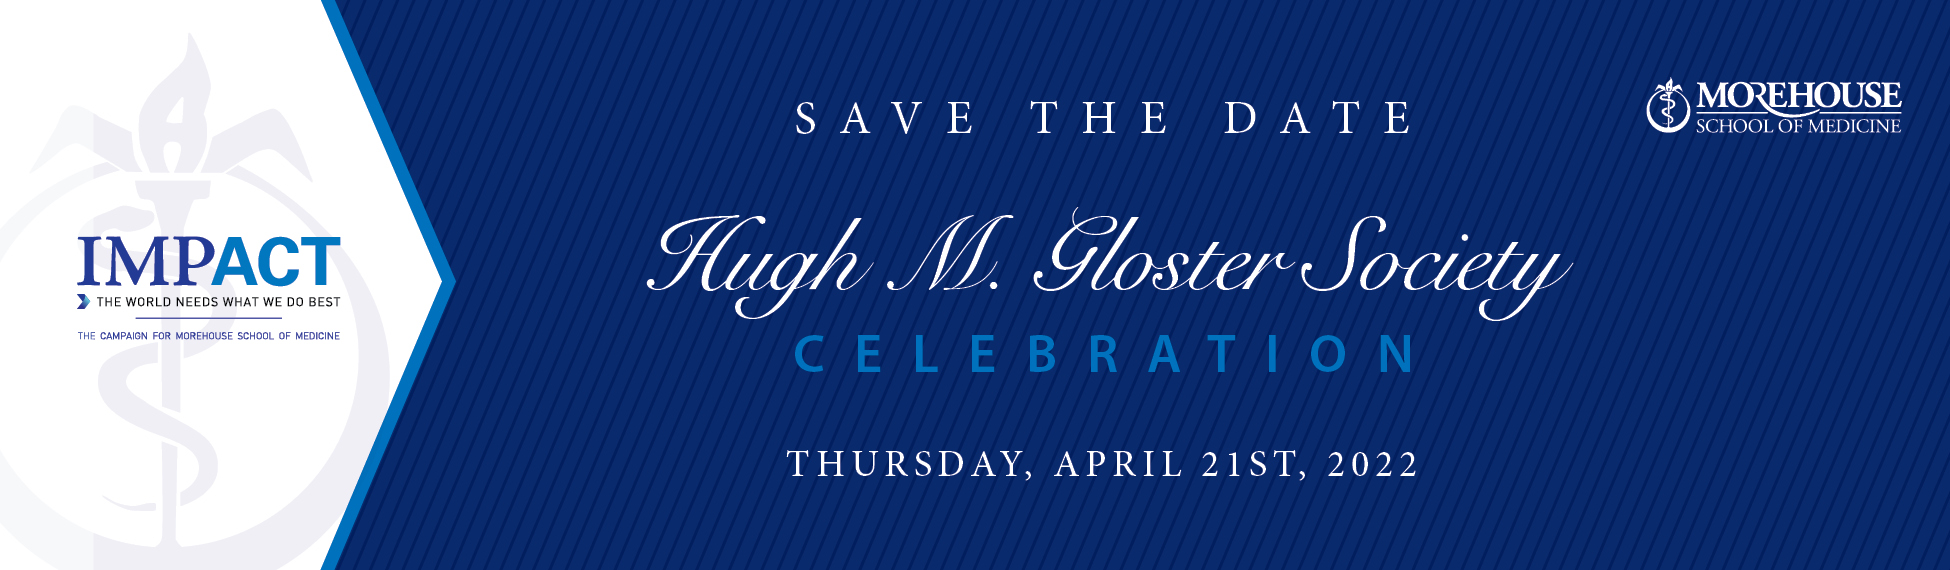 Gloster Society Save the Date